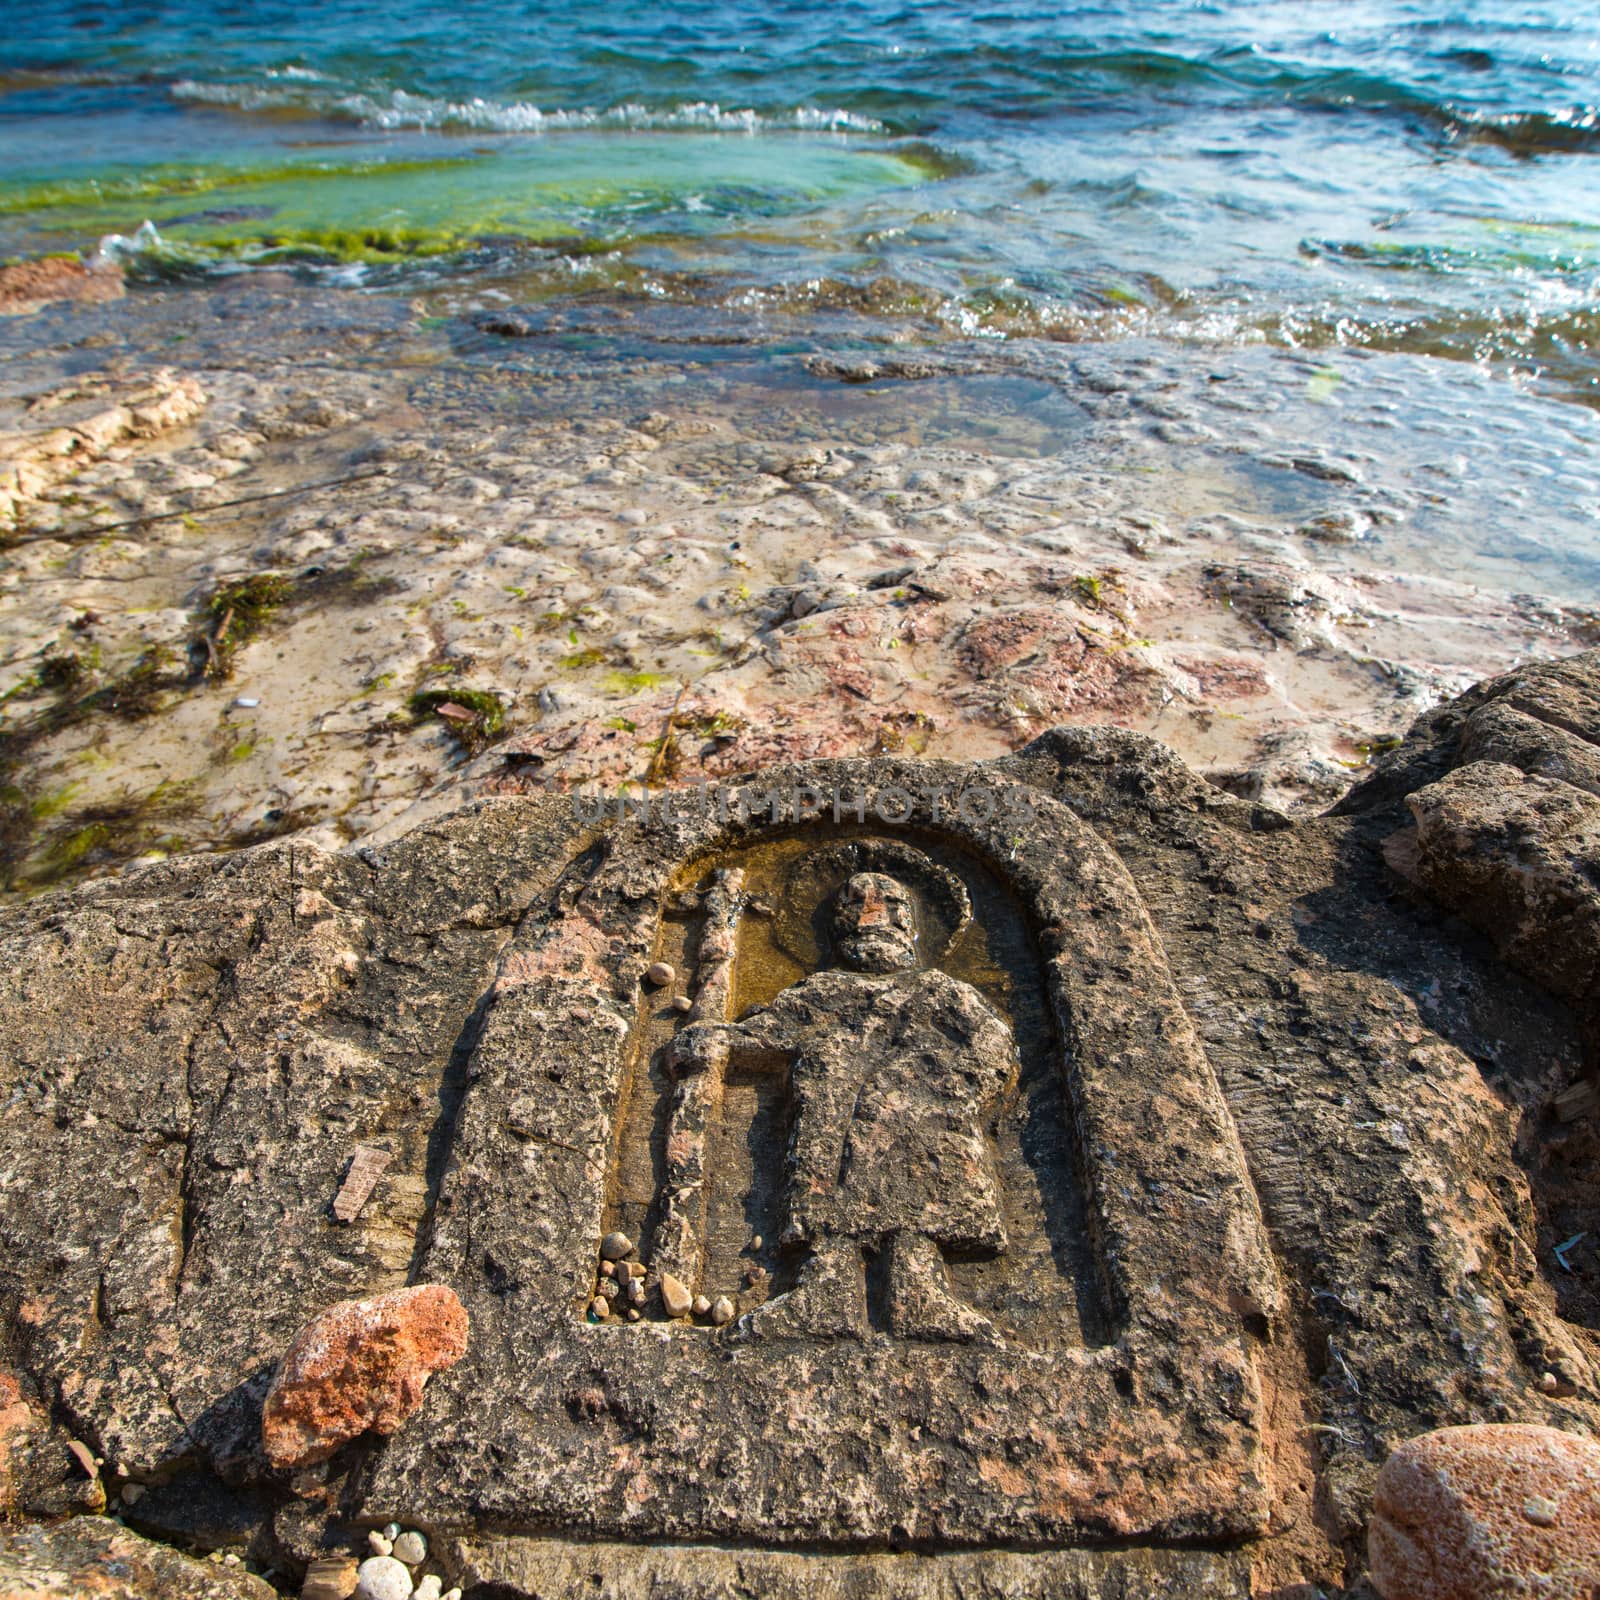 Rock carvings on the beach (icon of the saint with his staff) near Sevastopol (Crimea), Ukraine, May 2013